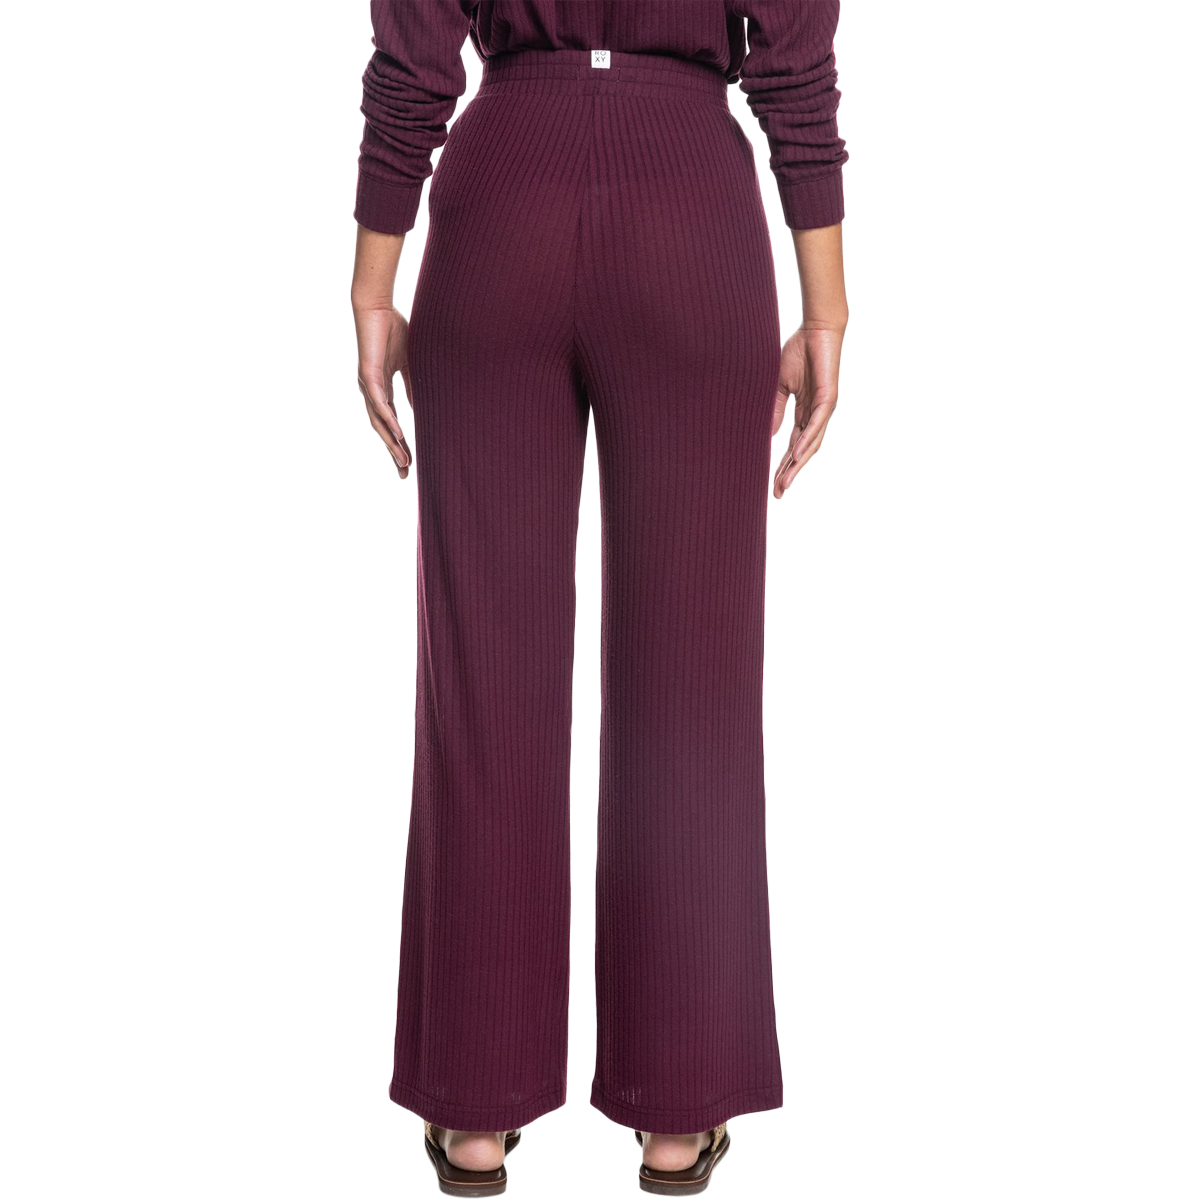 Women's Comfy Place Cozy Ribbed Pants alternate view